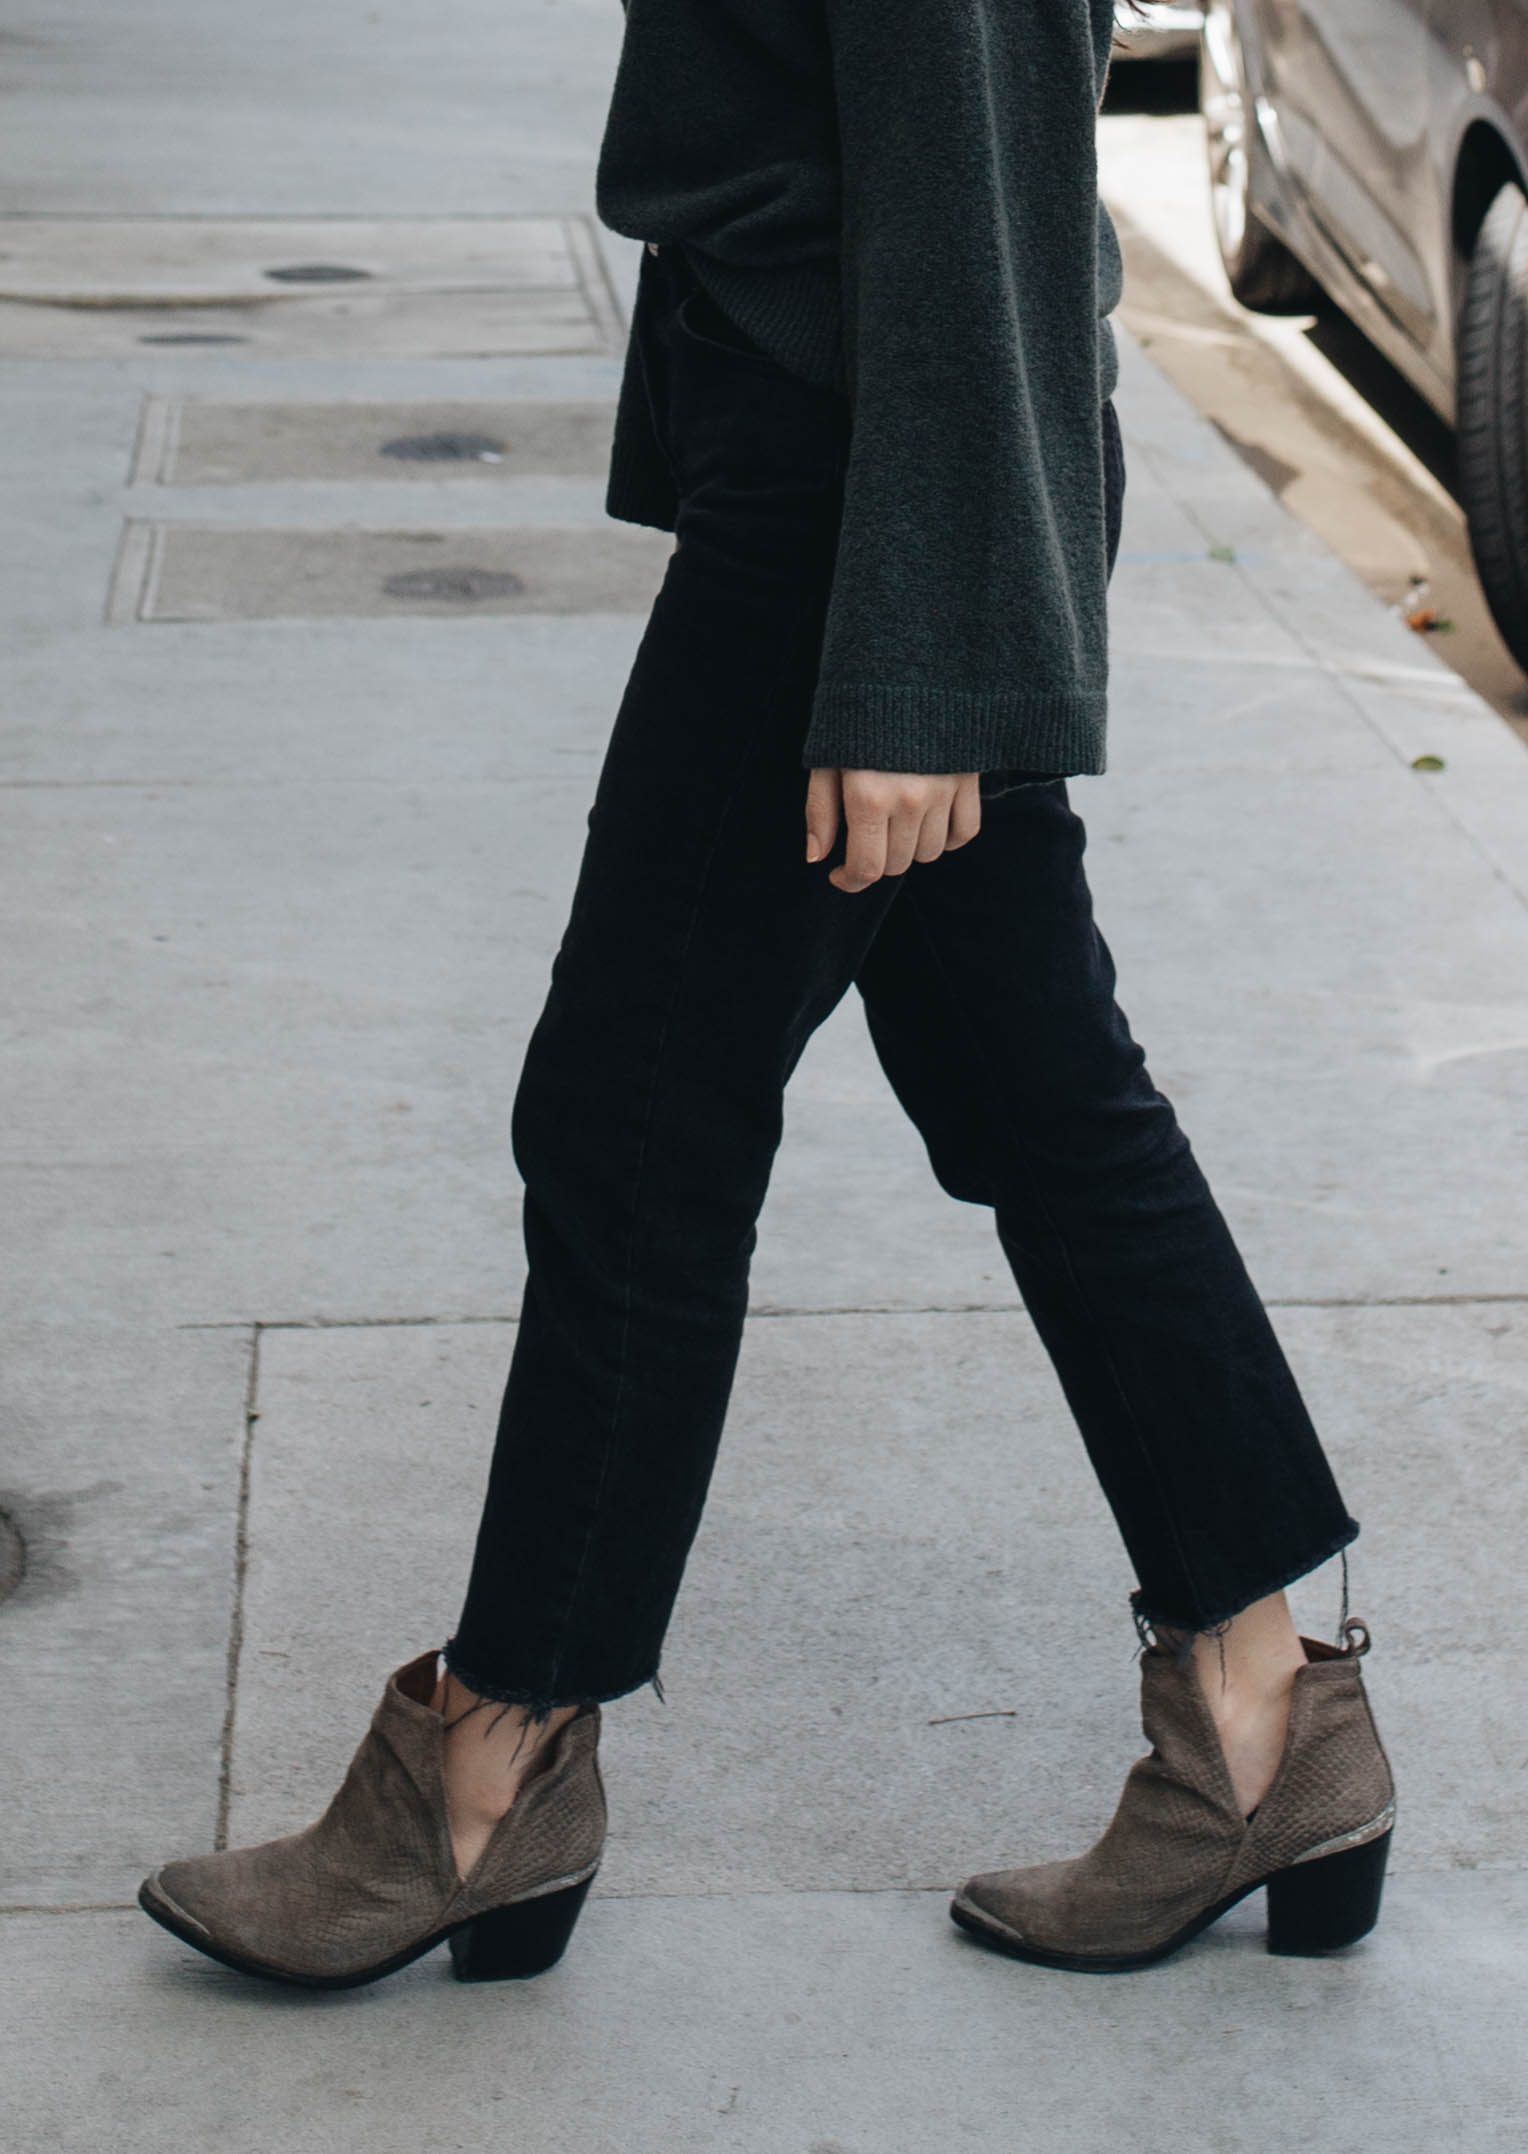 Bell Sleeves & Boots | Twinspiration 